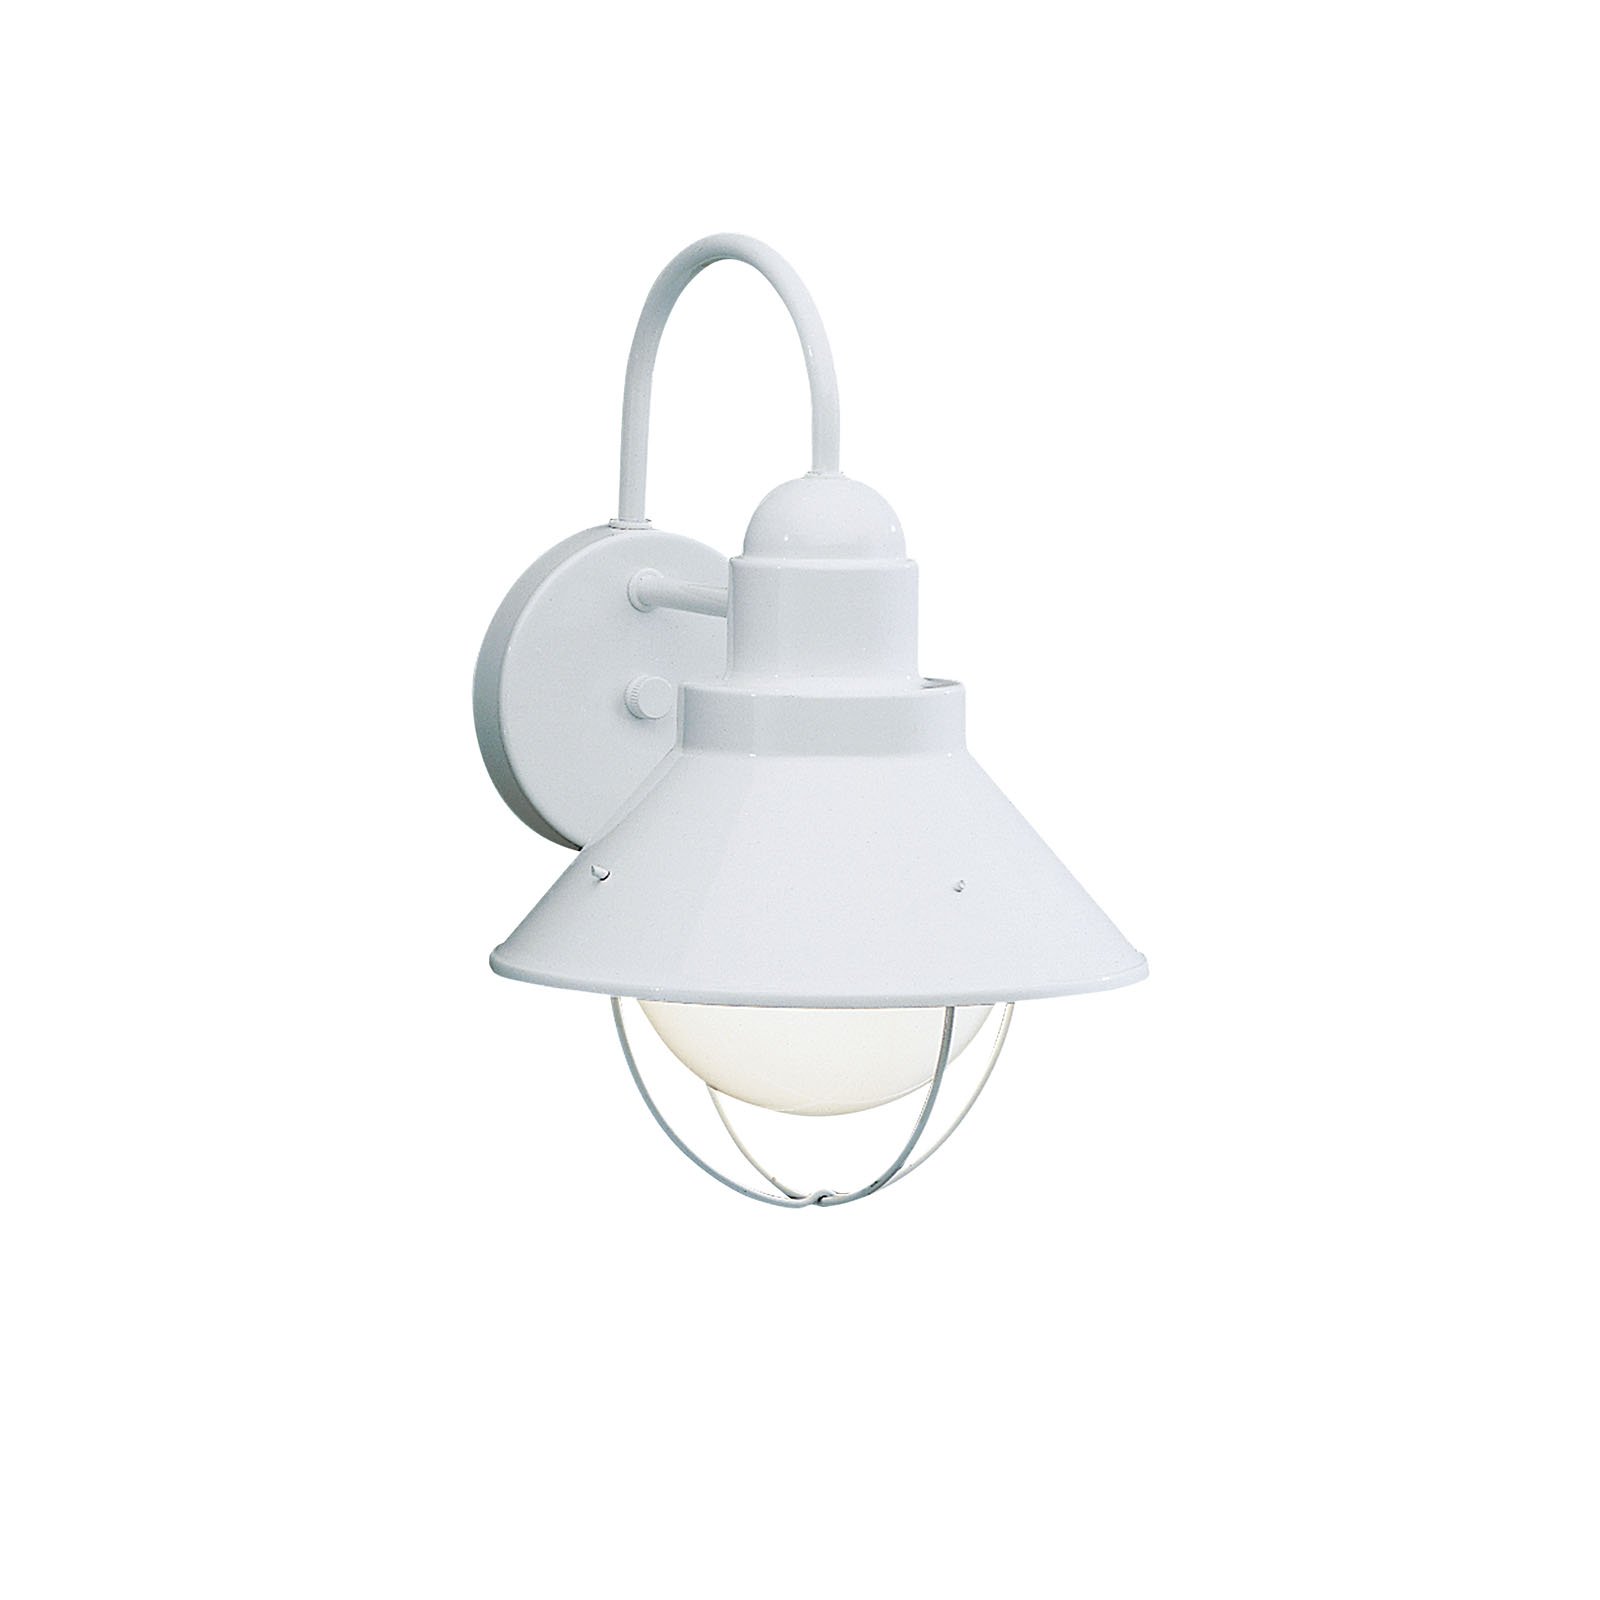 The Seaside(TM) 12in. 1 light outdoor wall light features a classic look with its White finish and glass globe. The Seaside(TM)wall light works in several aesthetic environments, including rustic, coastal, traditional and transitional.